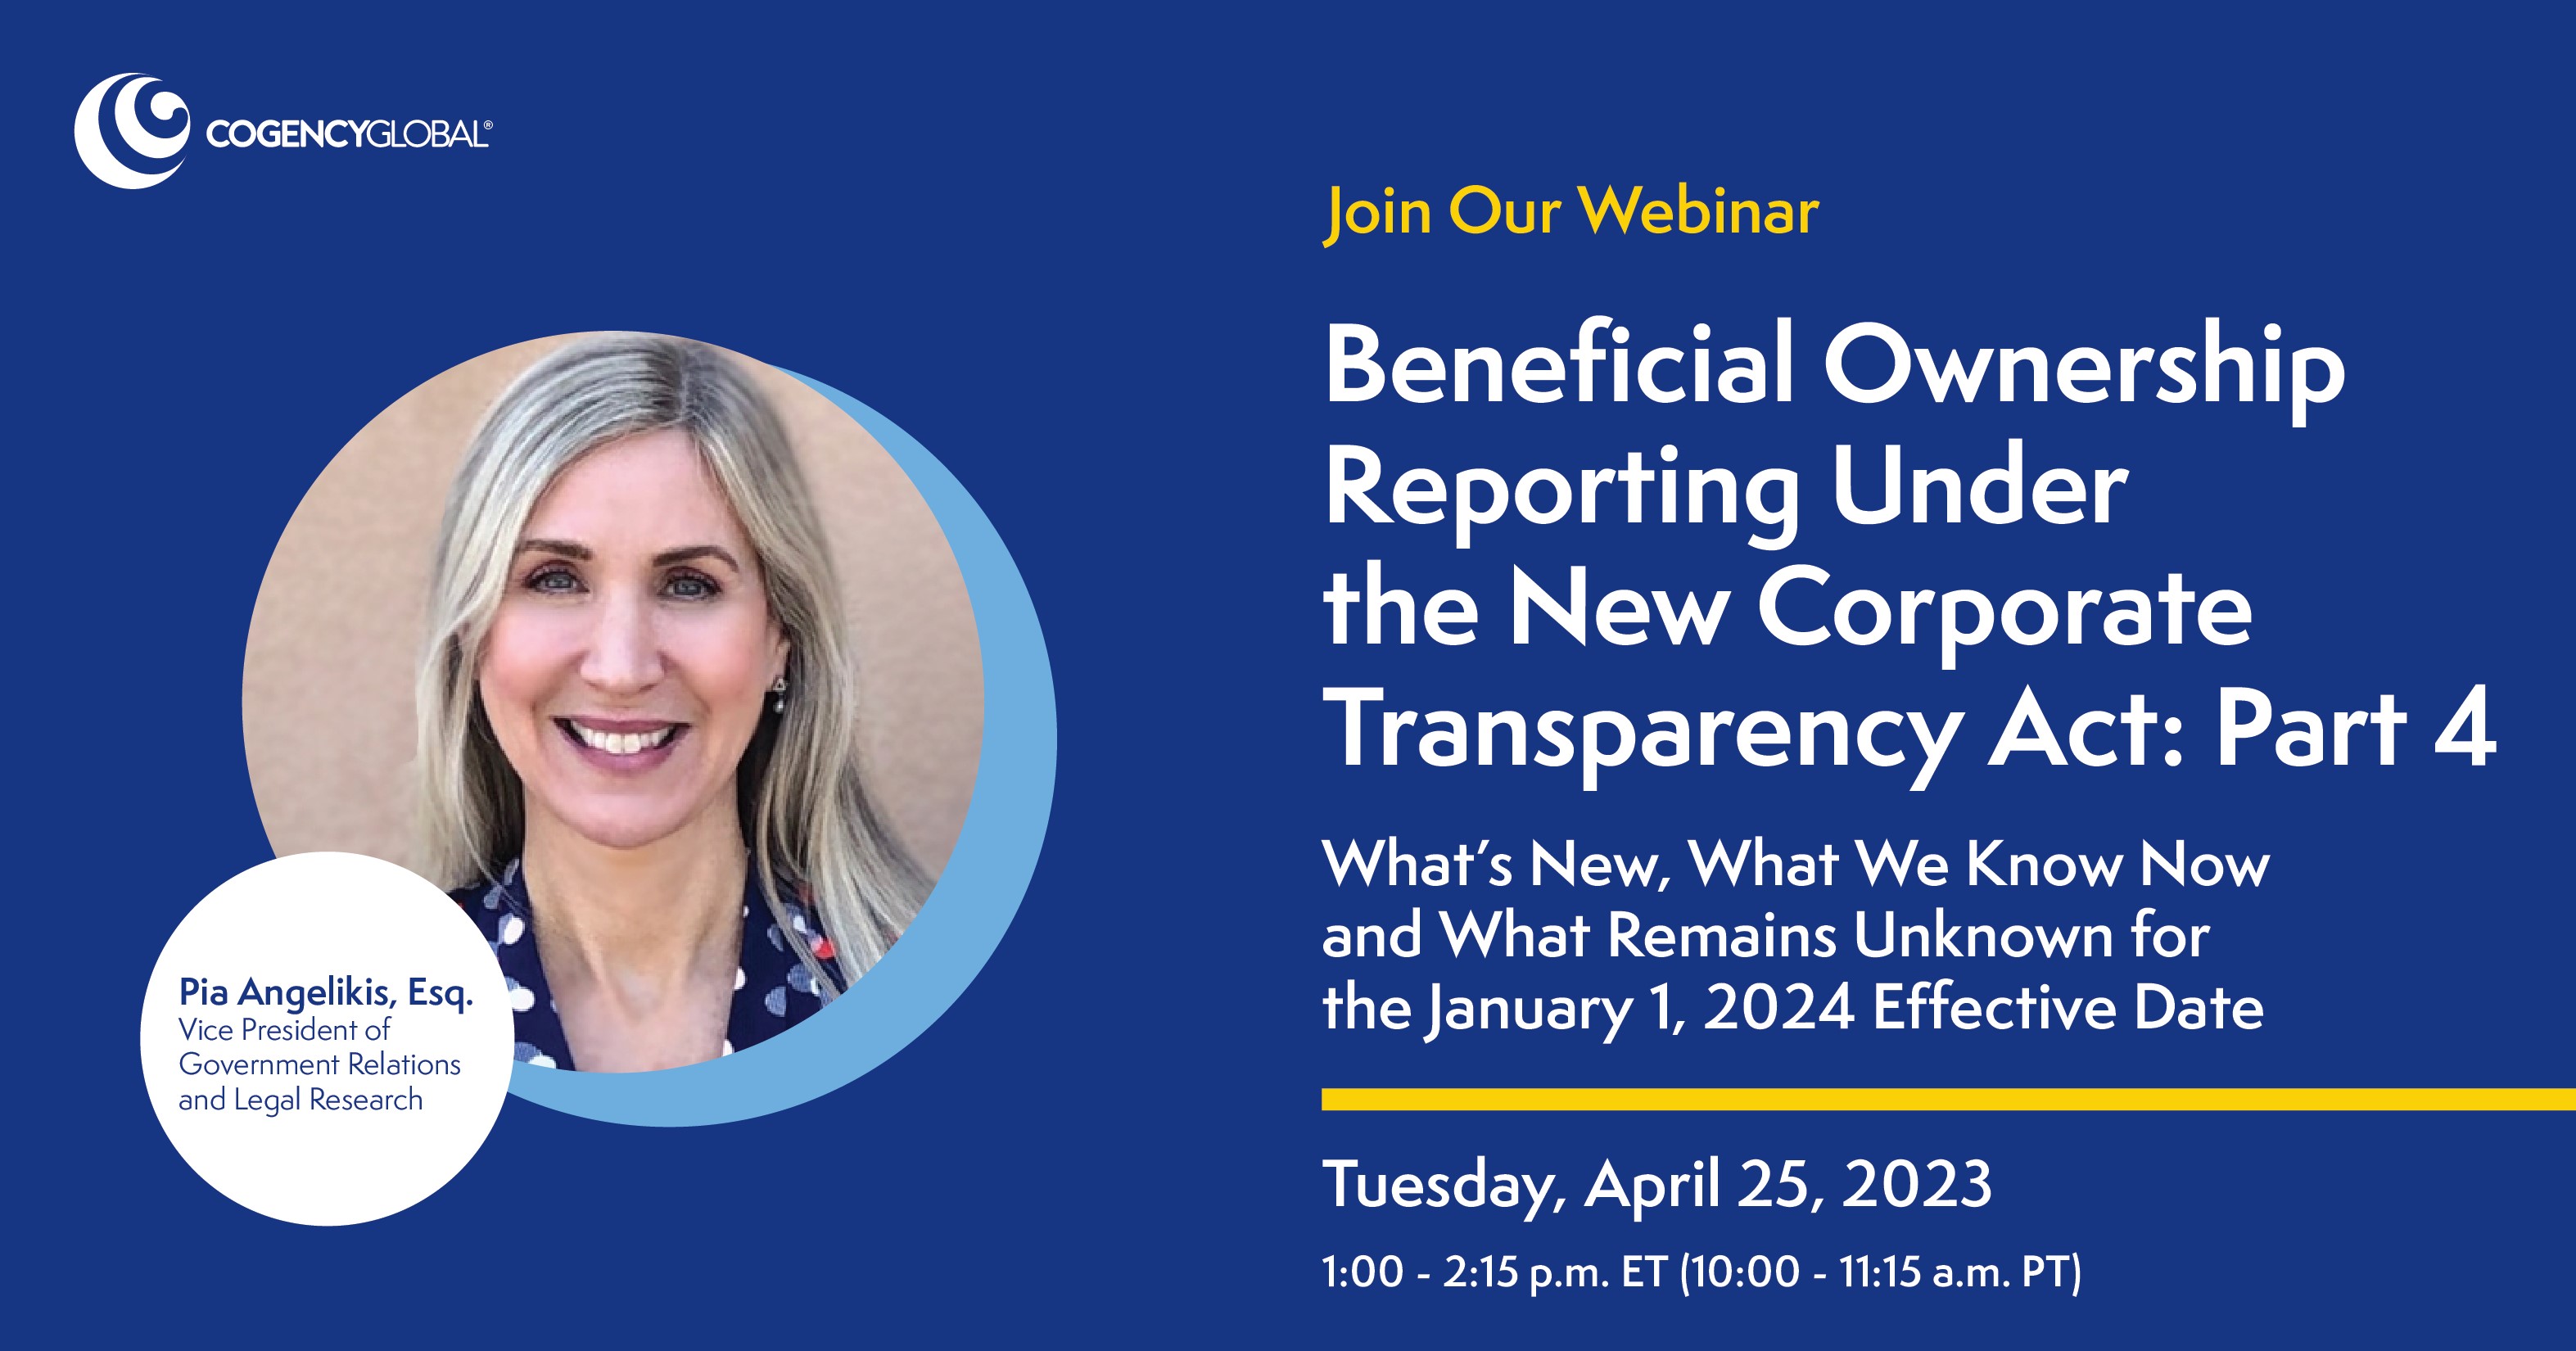 Beneficial Ownership Reporting Under the New Corporate Transparency Act